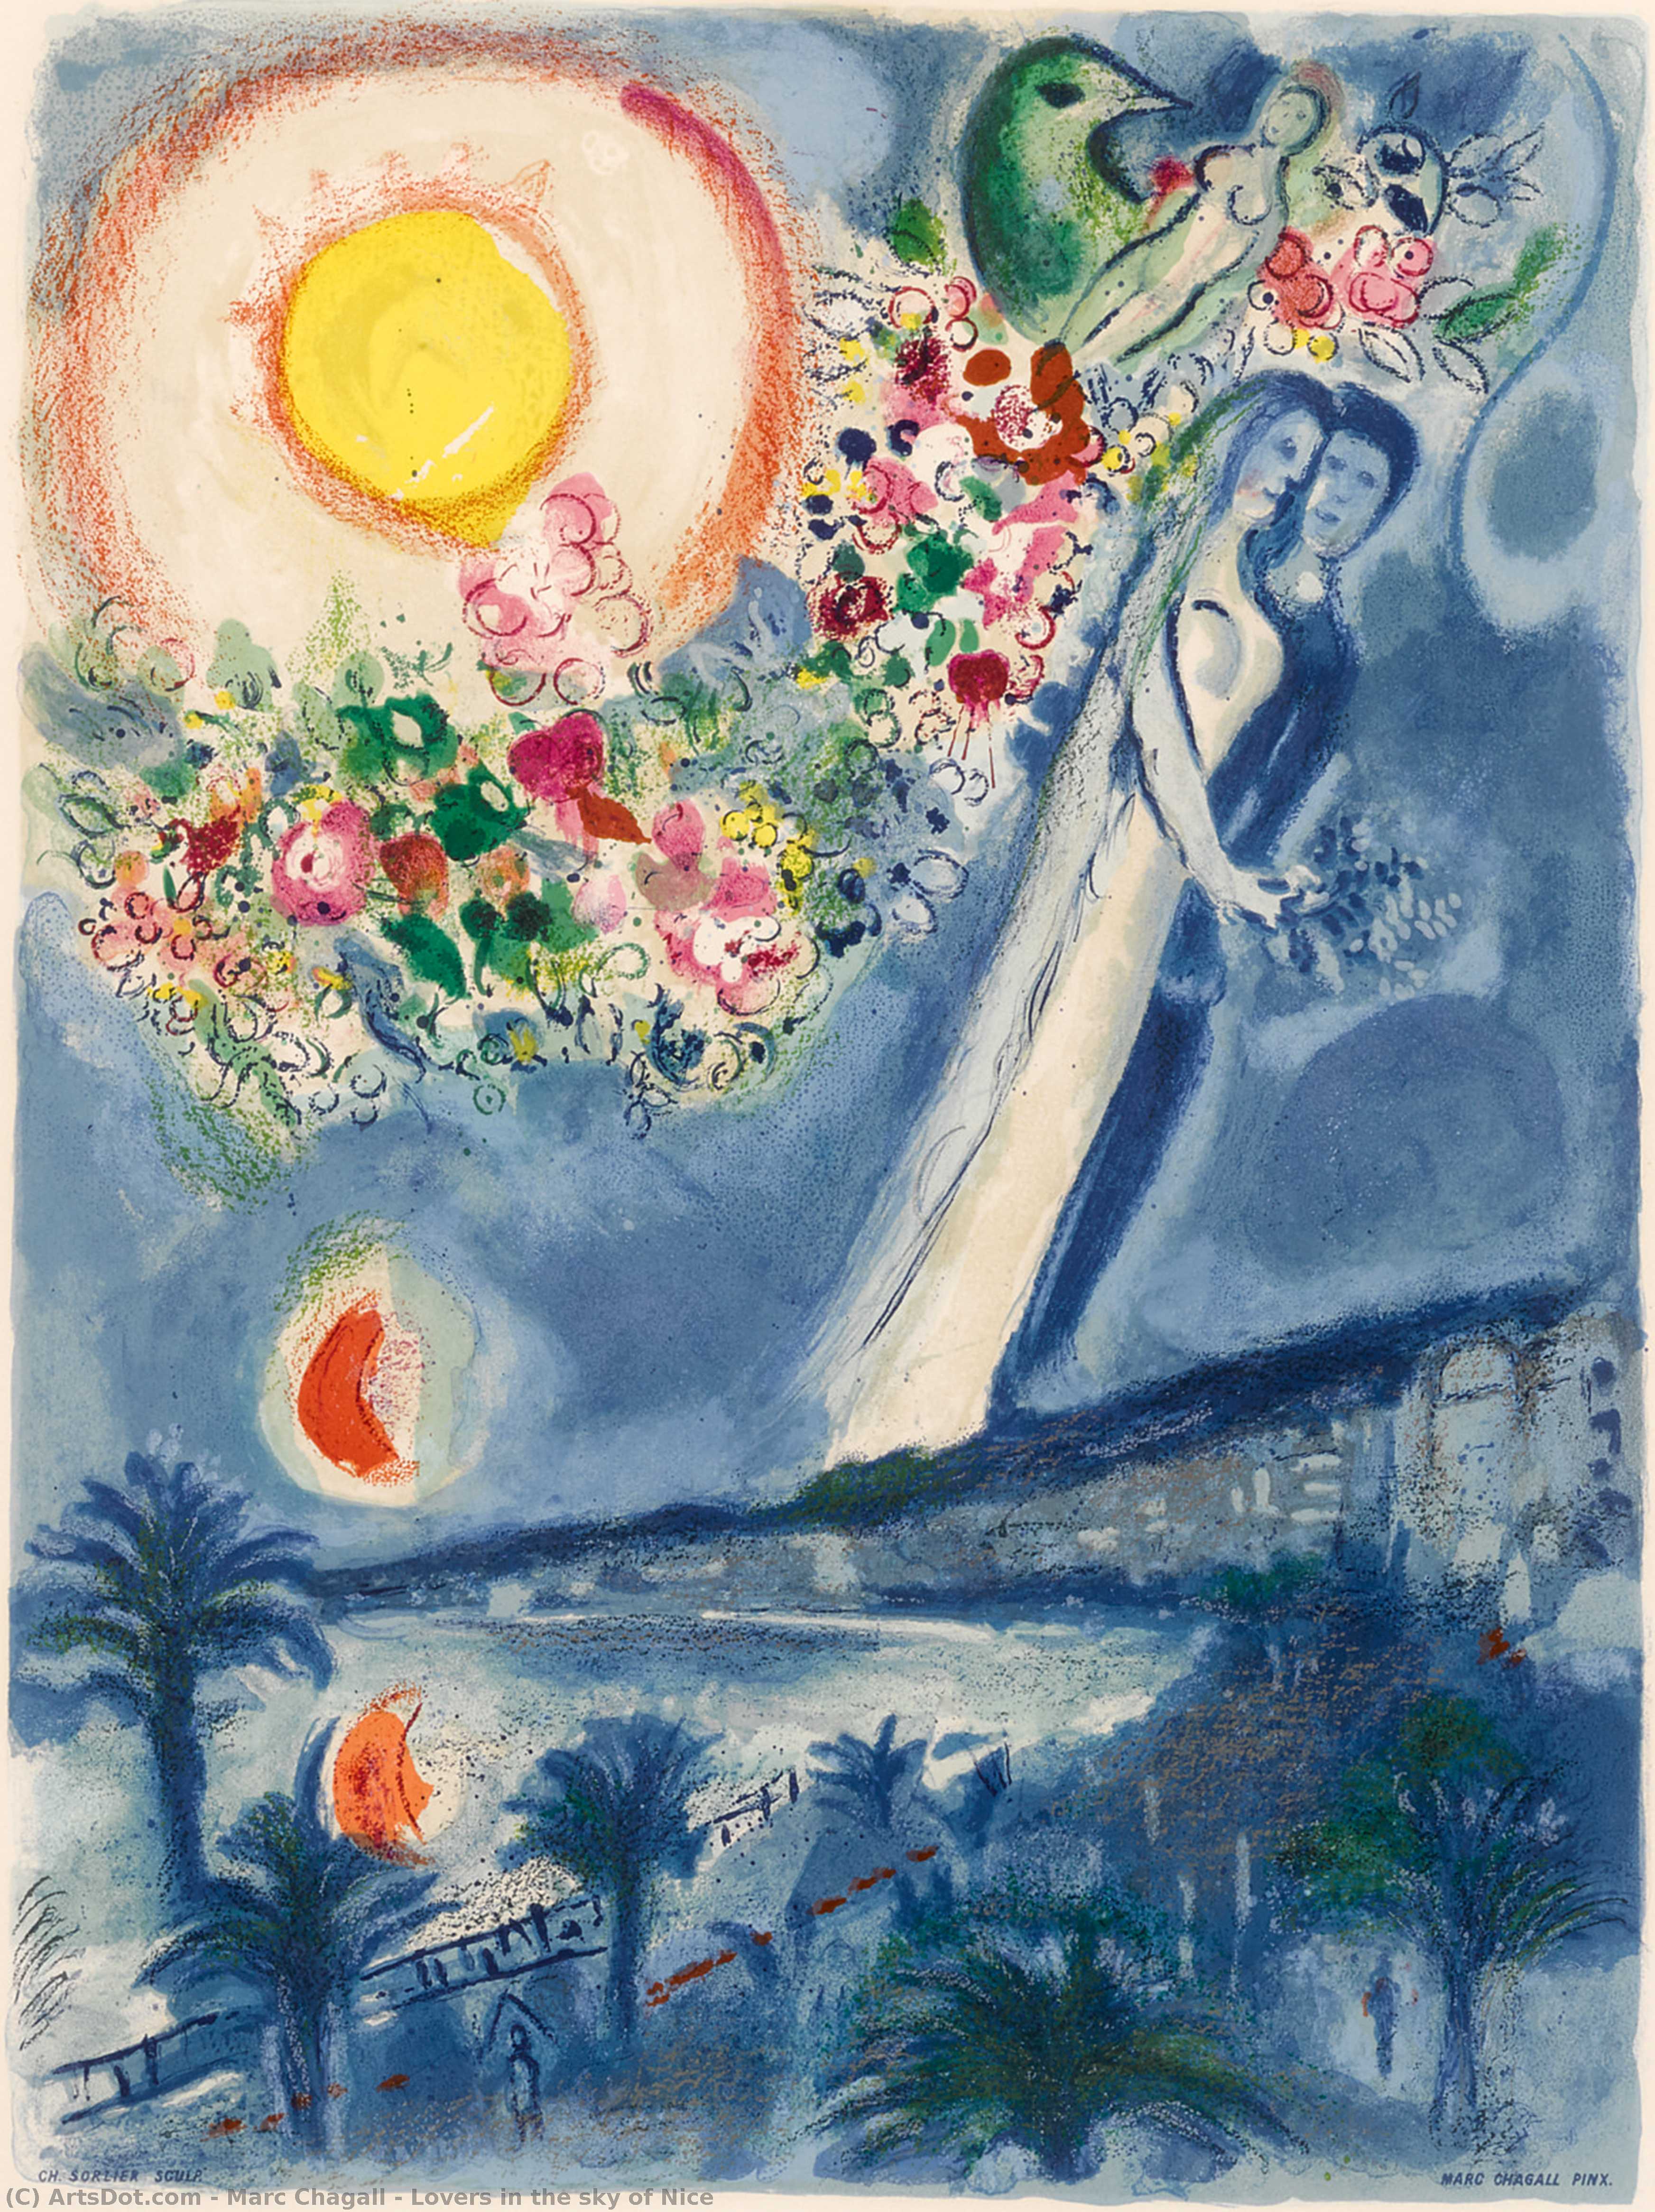 WikiOO.org - Encyclopedia of Fine Arts - Malba, Artwork Marc Chagall - Lovers in the sky of Nice